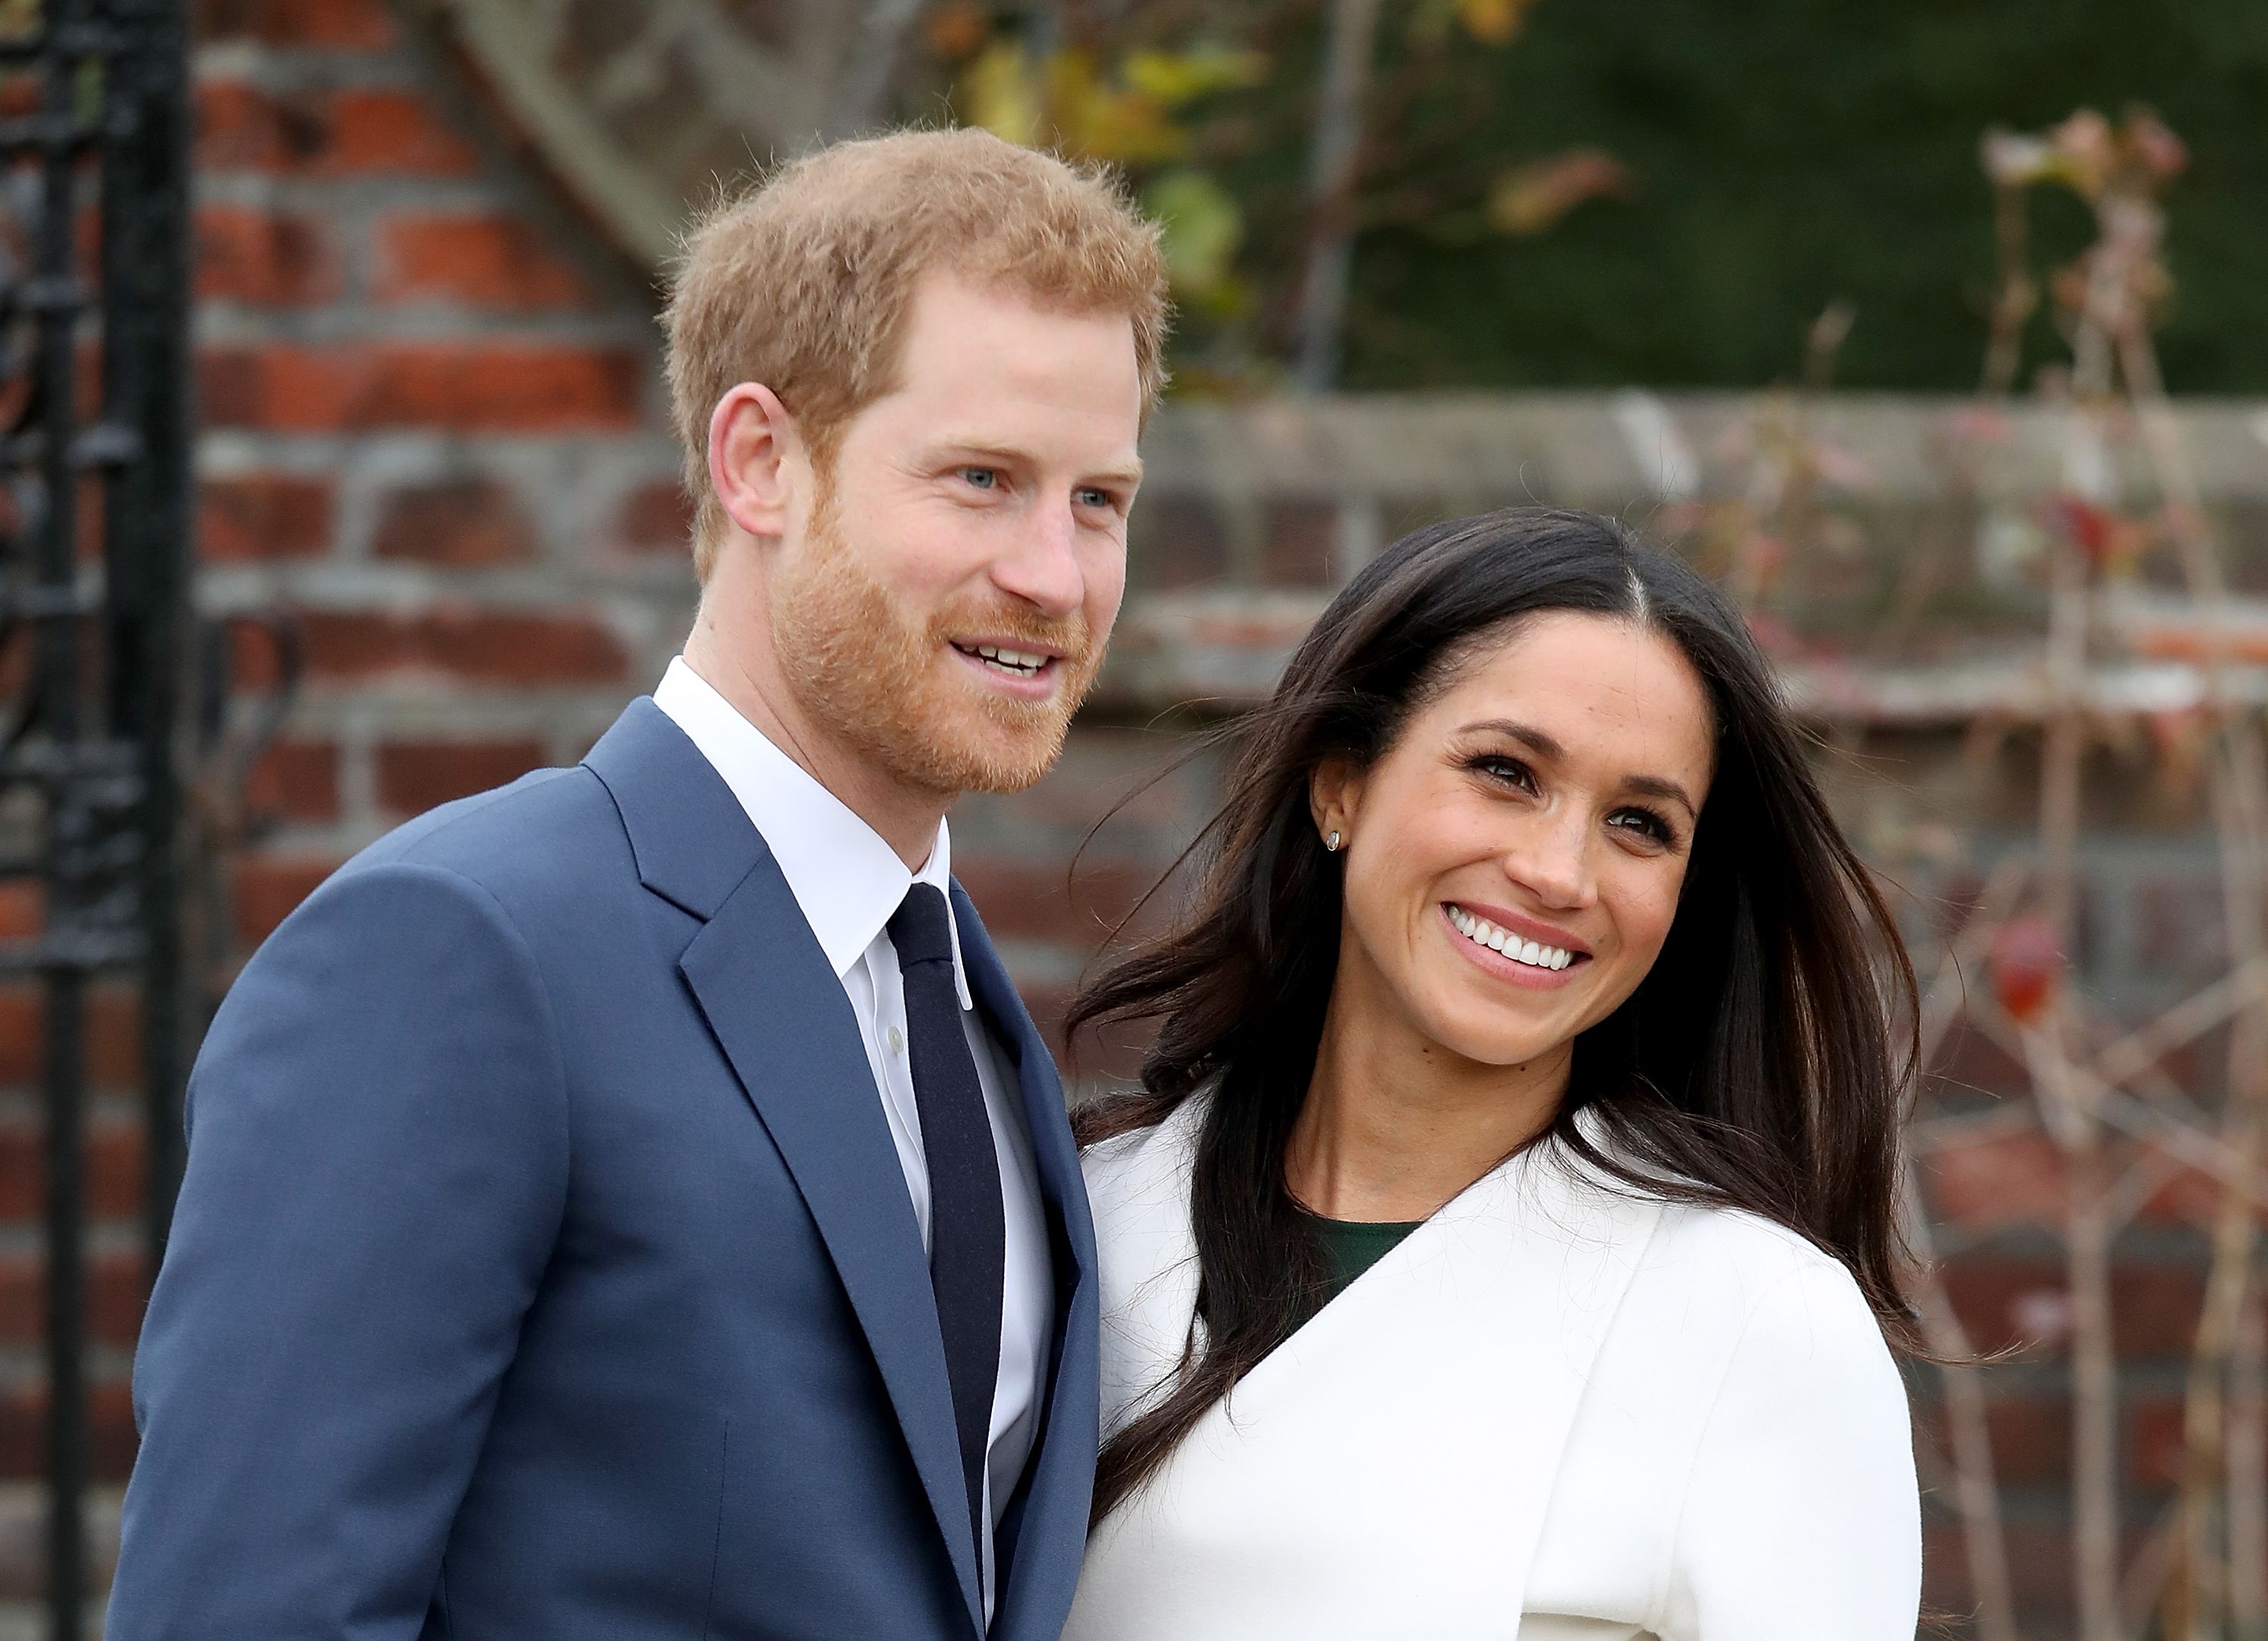 Prince Harry and Meghan Markle at an official photocall to announce their engagement at The Sunken Gardens at Kensington Palace on November 27, 2017 | Photo: Getty Images